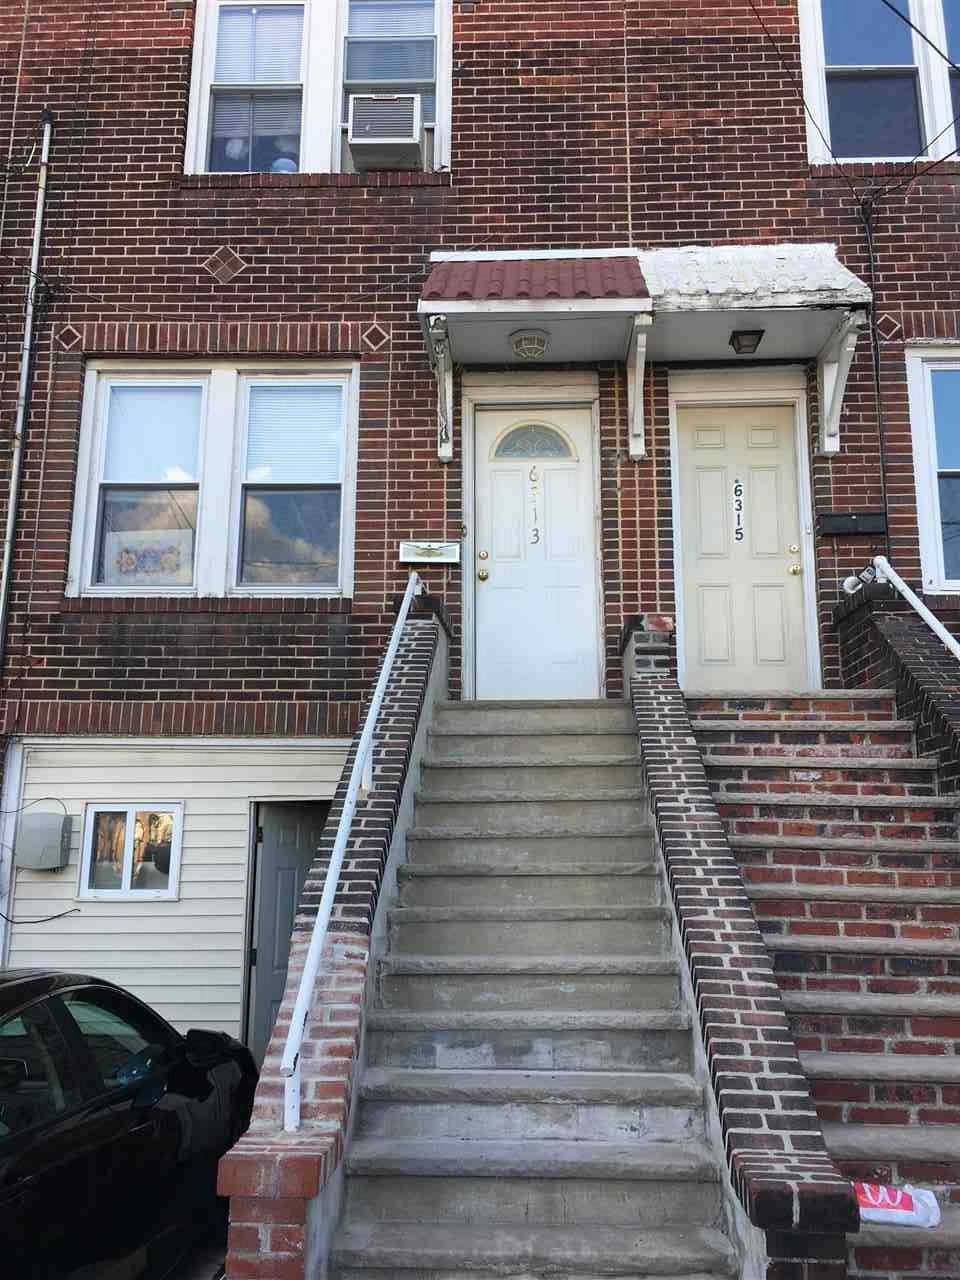 Well maintained Brick Row House; features 2 Bedroom